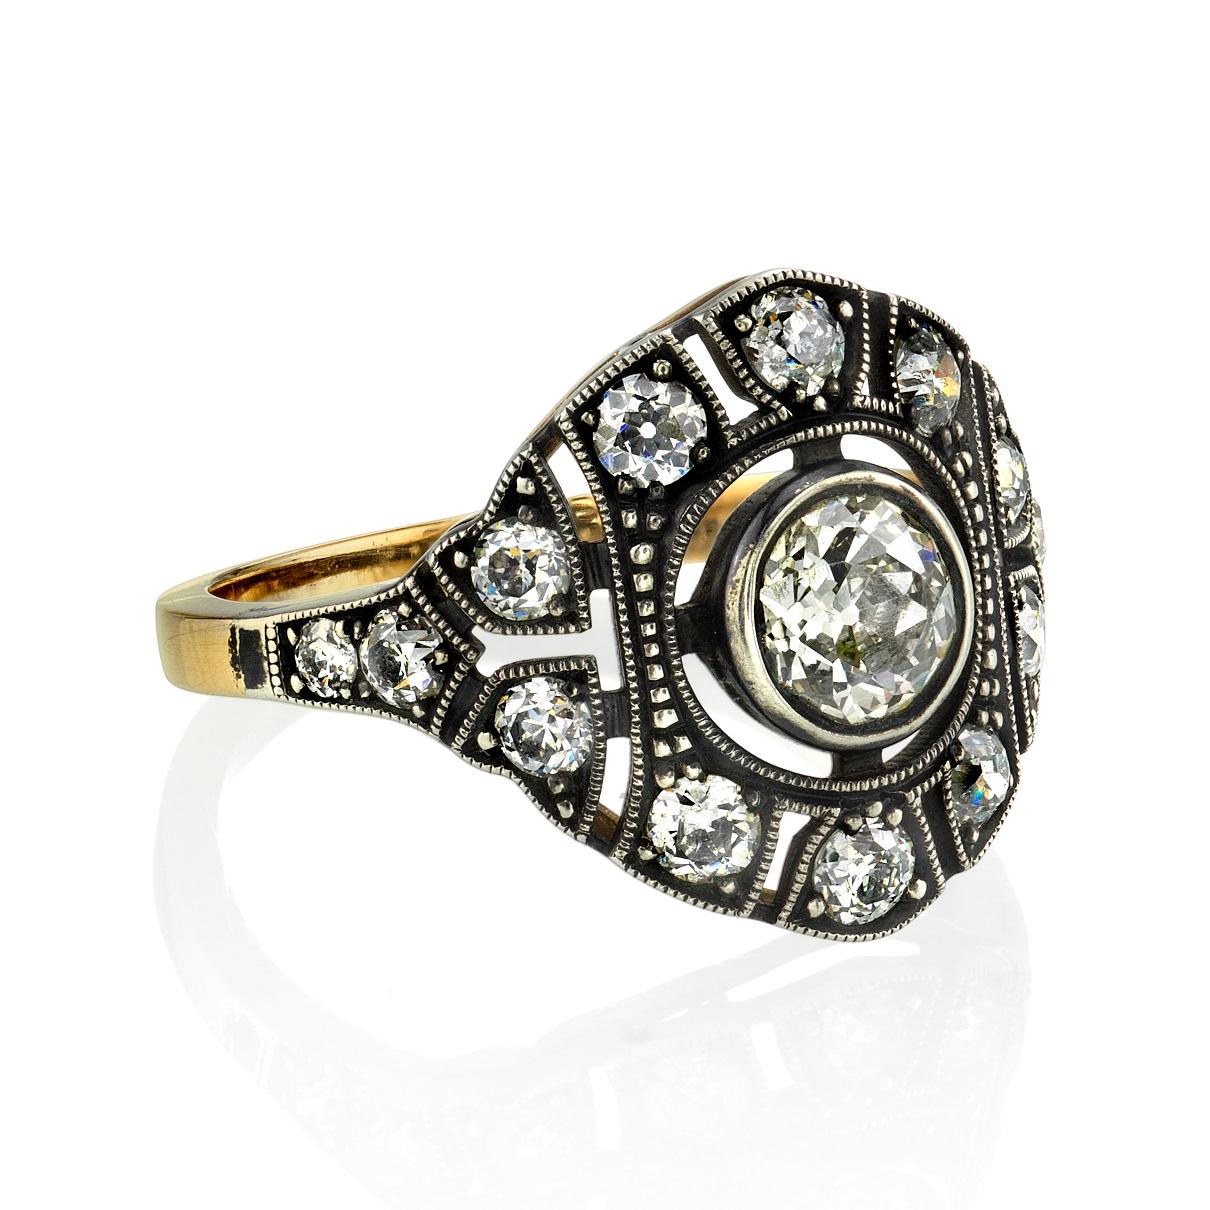 0.59ct N/VS2 GIA certified old European cut diamond set in a handcrafted 18k yellow gold and silver mounting. A two toned Edwardian inspired design that features a low profile. Ring is currently a size 6 and can be sized to fit. 